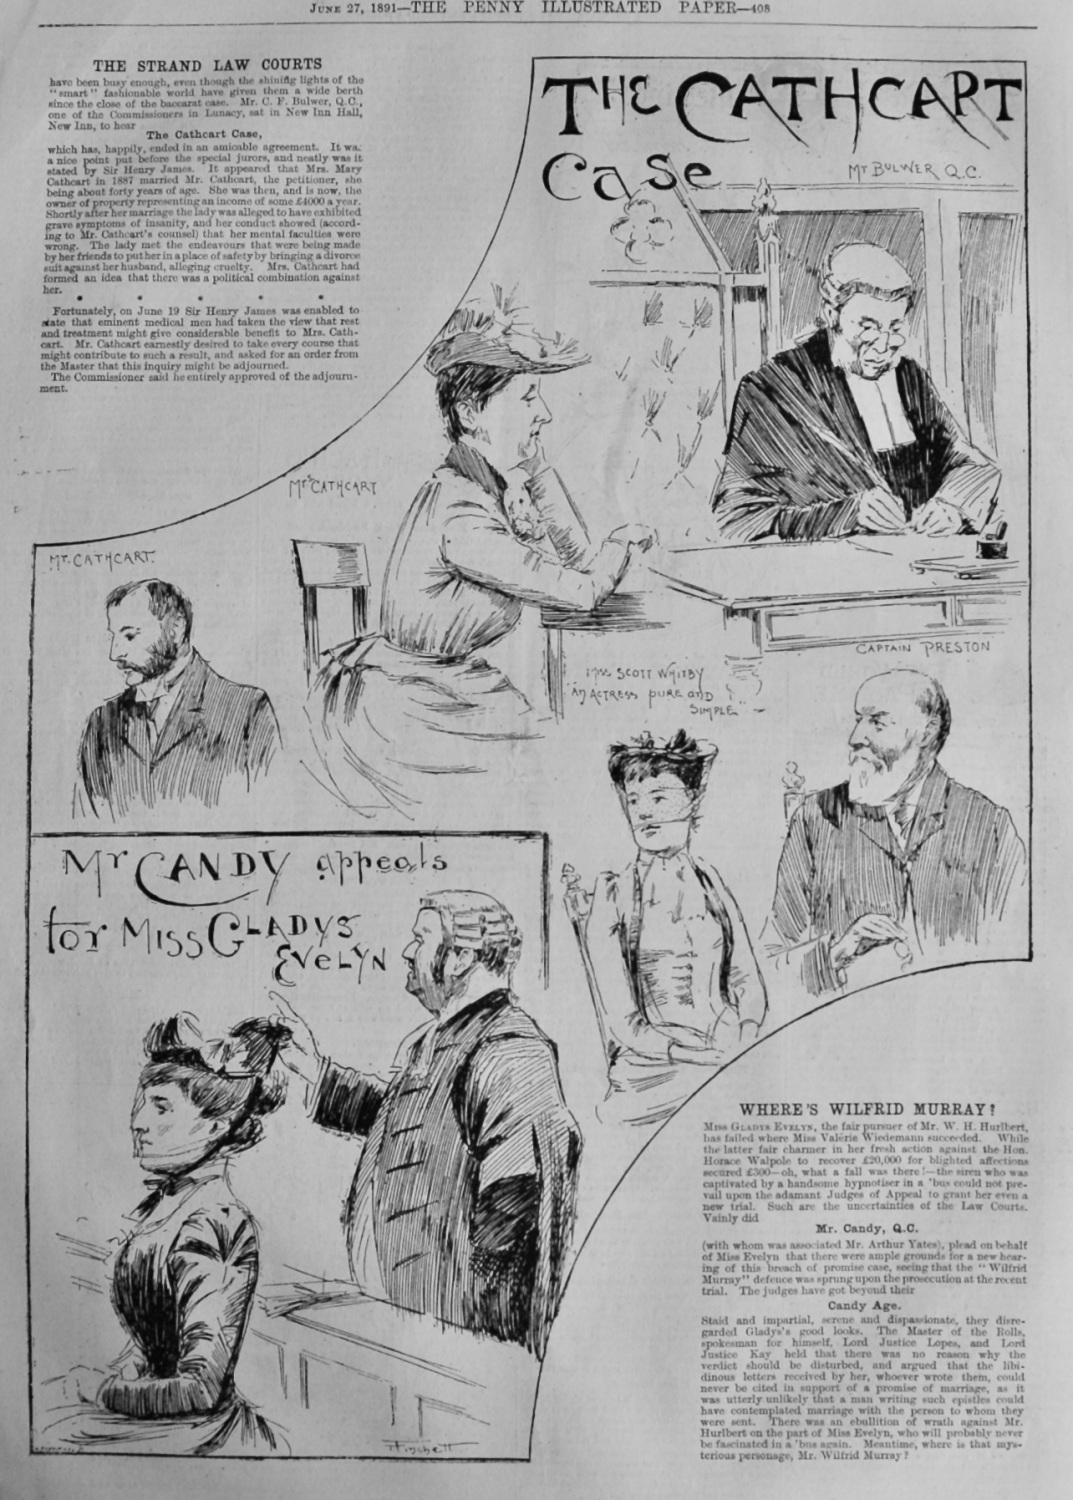 The Cathcart Case.    &    Mr. Candy appeals for Miss Glady's Evelyn.  1891